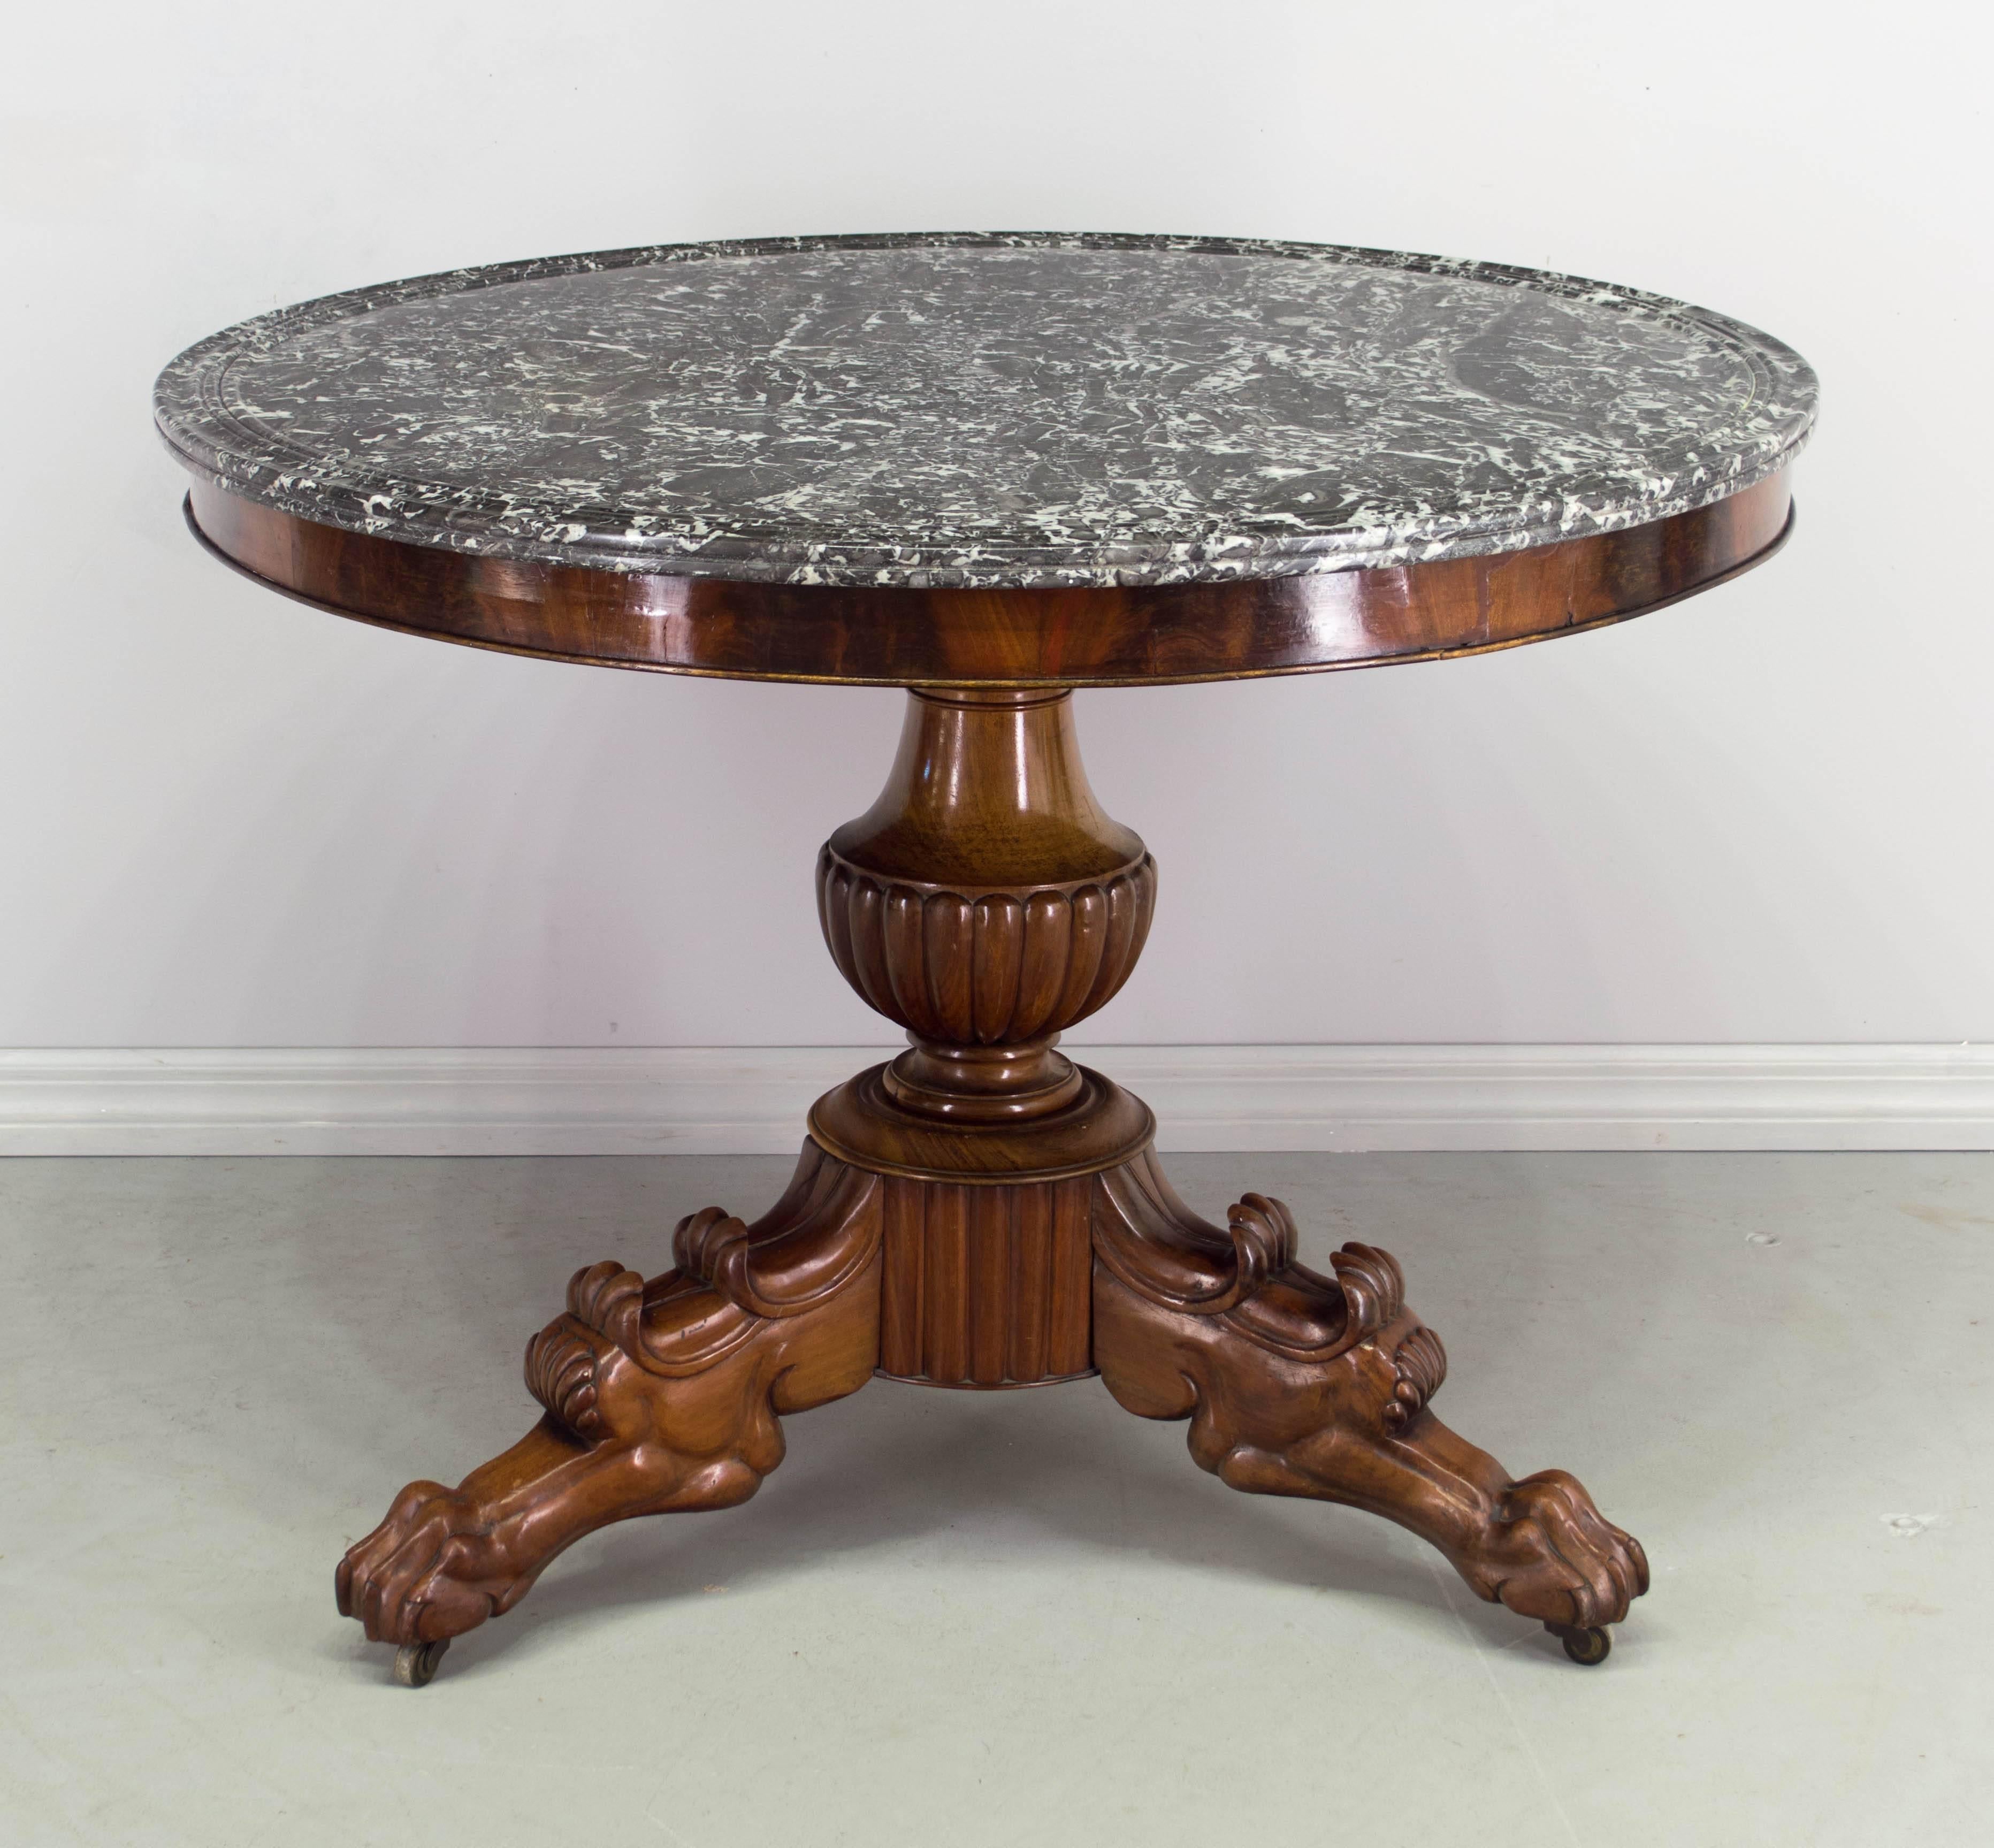 19th century French Napoleon III gueridon or center table with carved mahogany pedestal base having a fluted urn shaped column and three stylized lion legs. A Classic form with exception hand carving. Original Saint Anne double grooved marble top